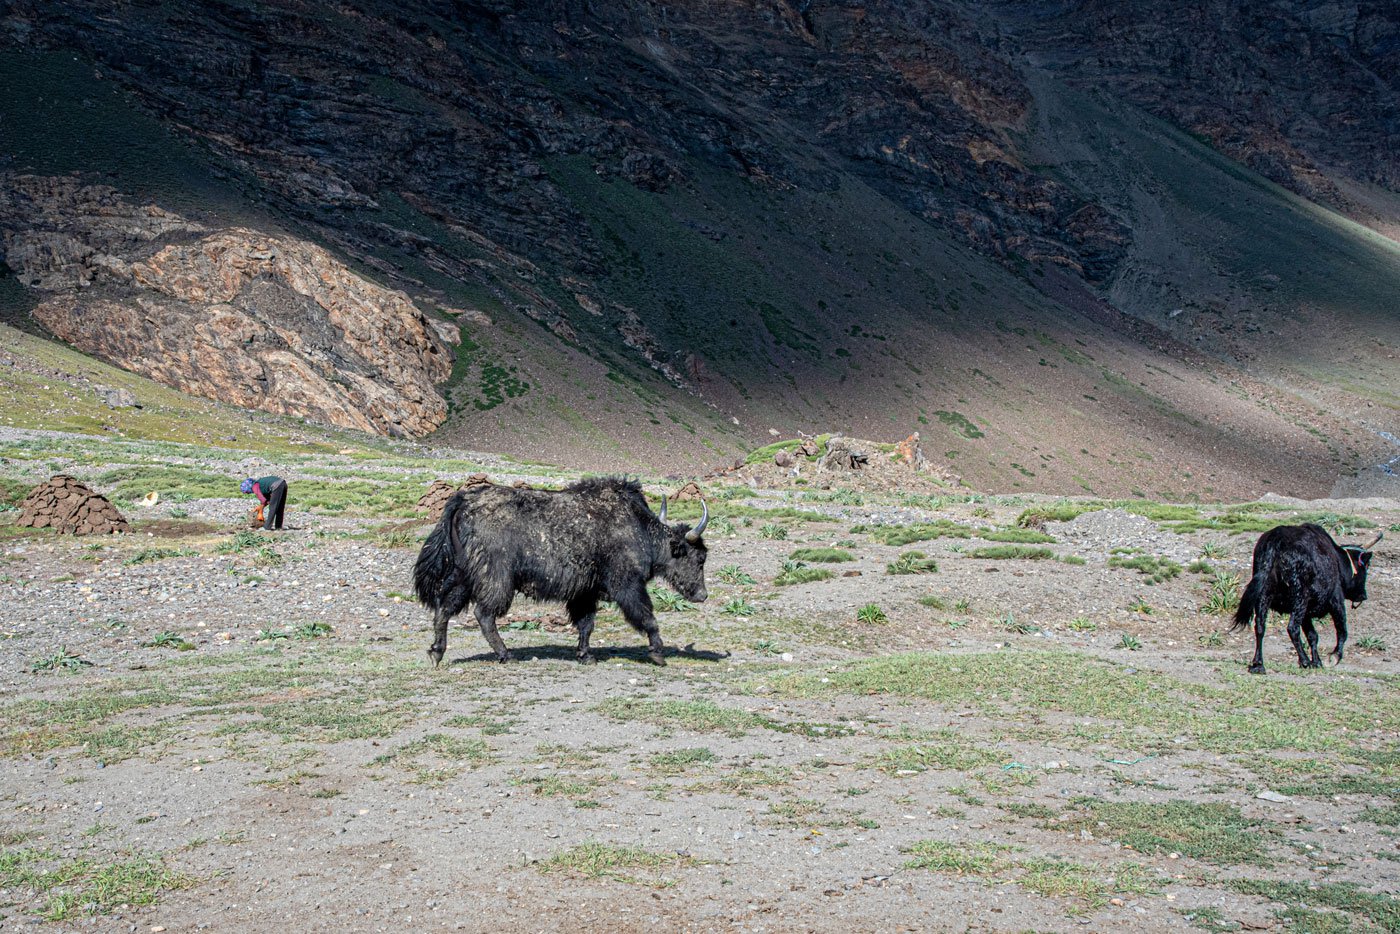 Locals say that there is a large variation in temperatures, with unusually hot summers. This has affected the yak population which has halved in the last ten years